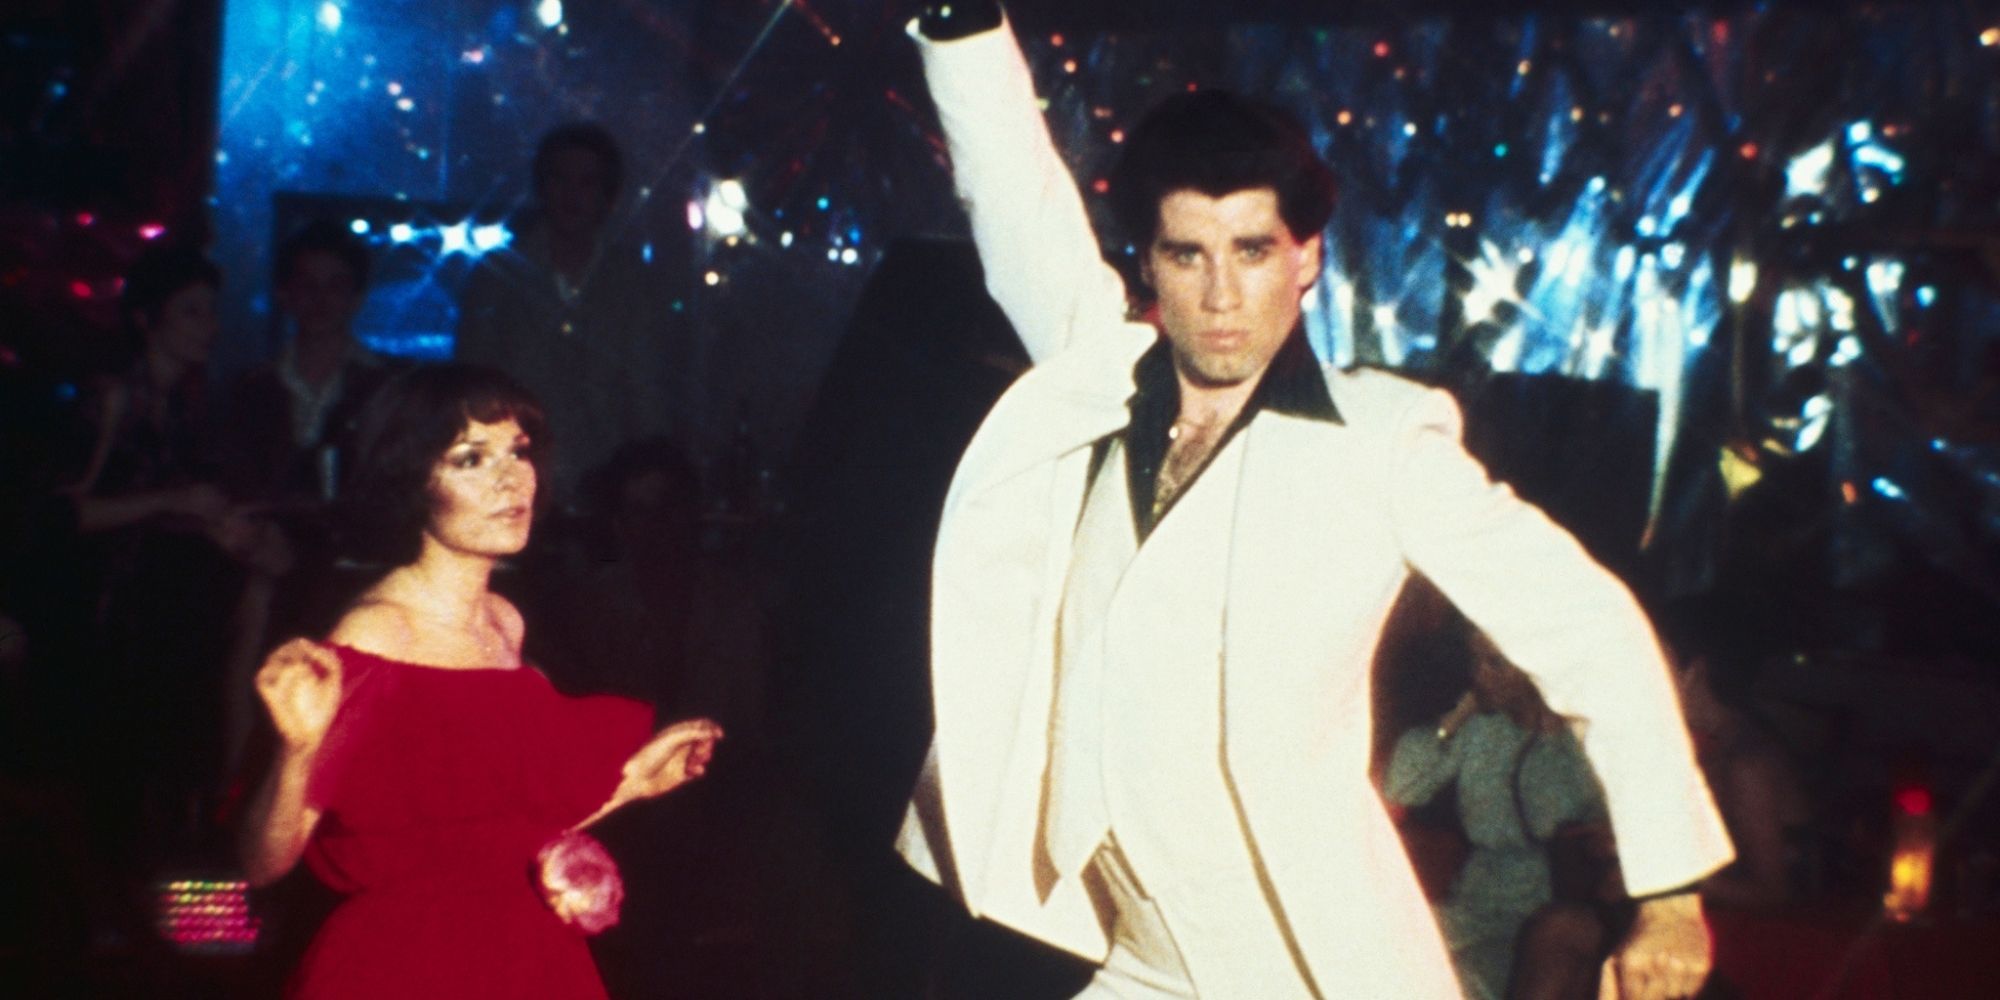 Official image of Saturday Night Fever (1977).